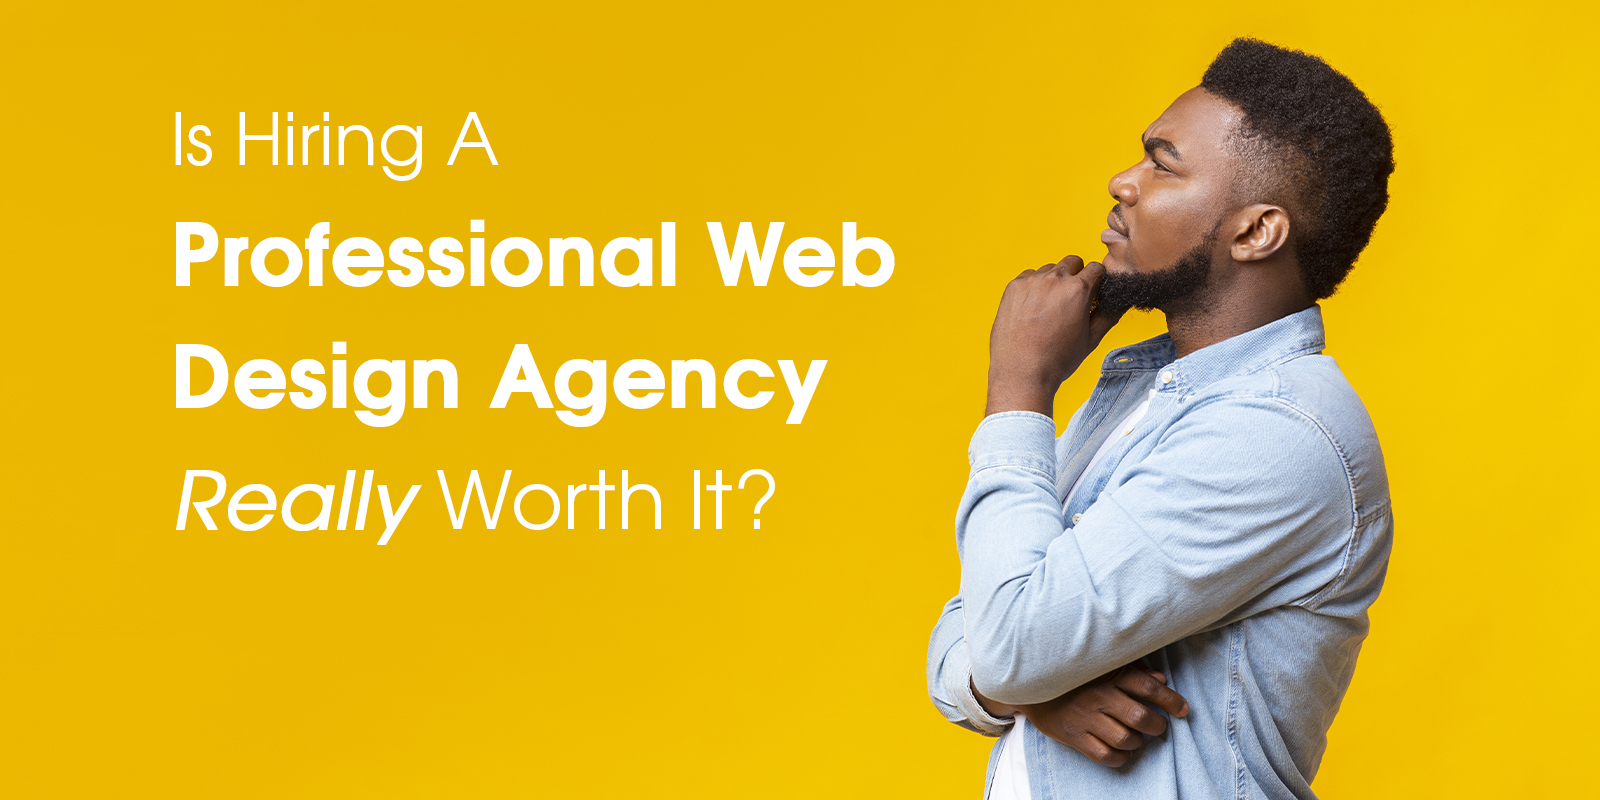 Is Hiring A Professional Web Design Agency Really Worth It?